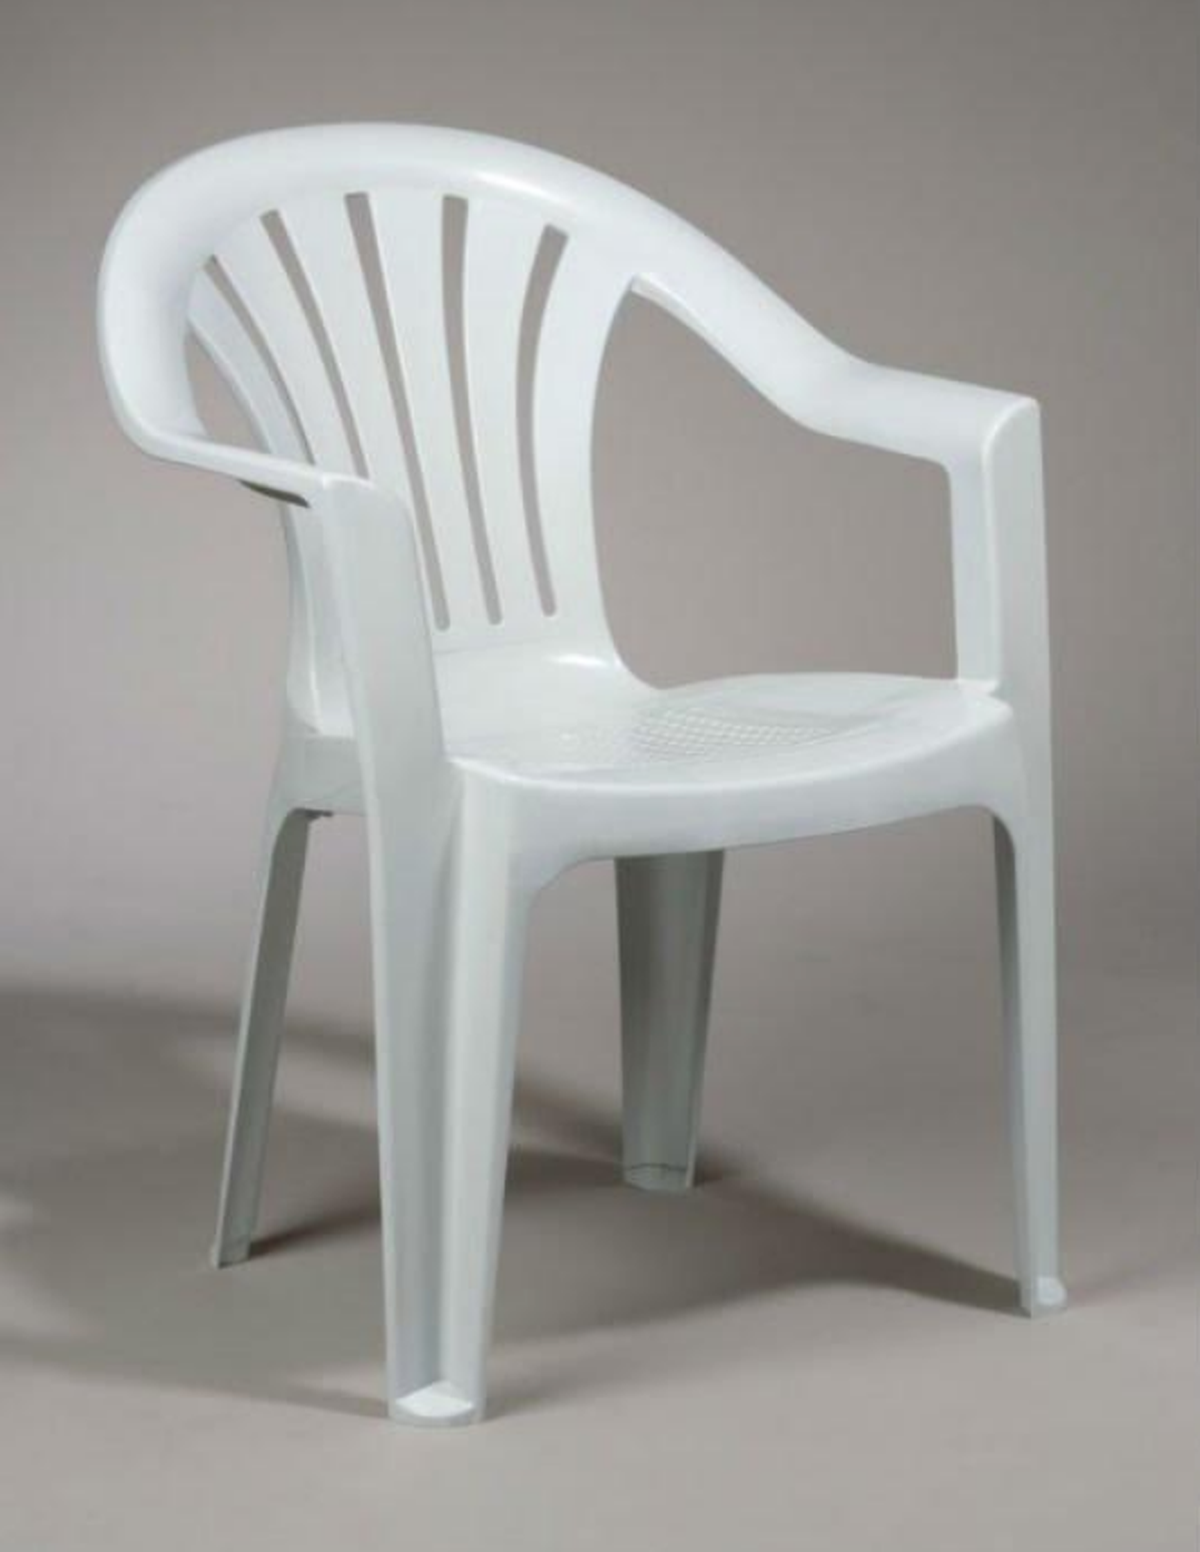 Secondhand Chairs and Tables | Outdoor Furniture | 150x White Plastic